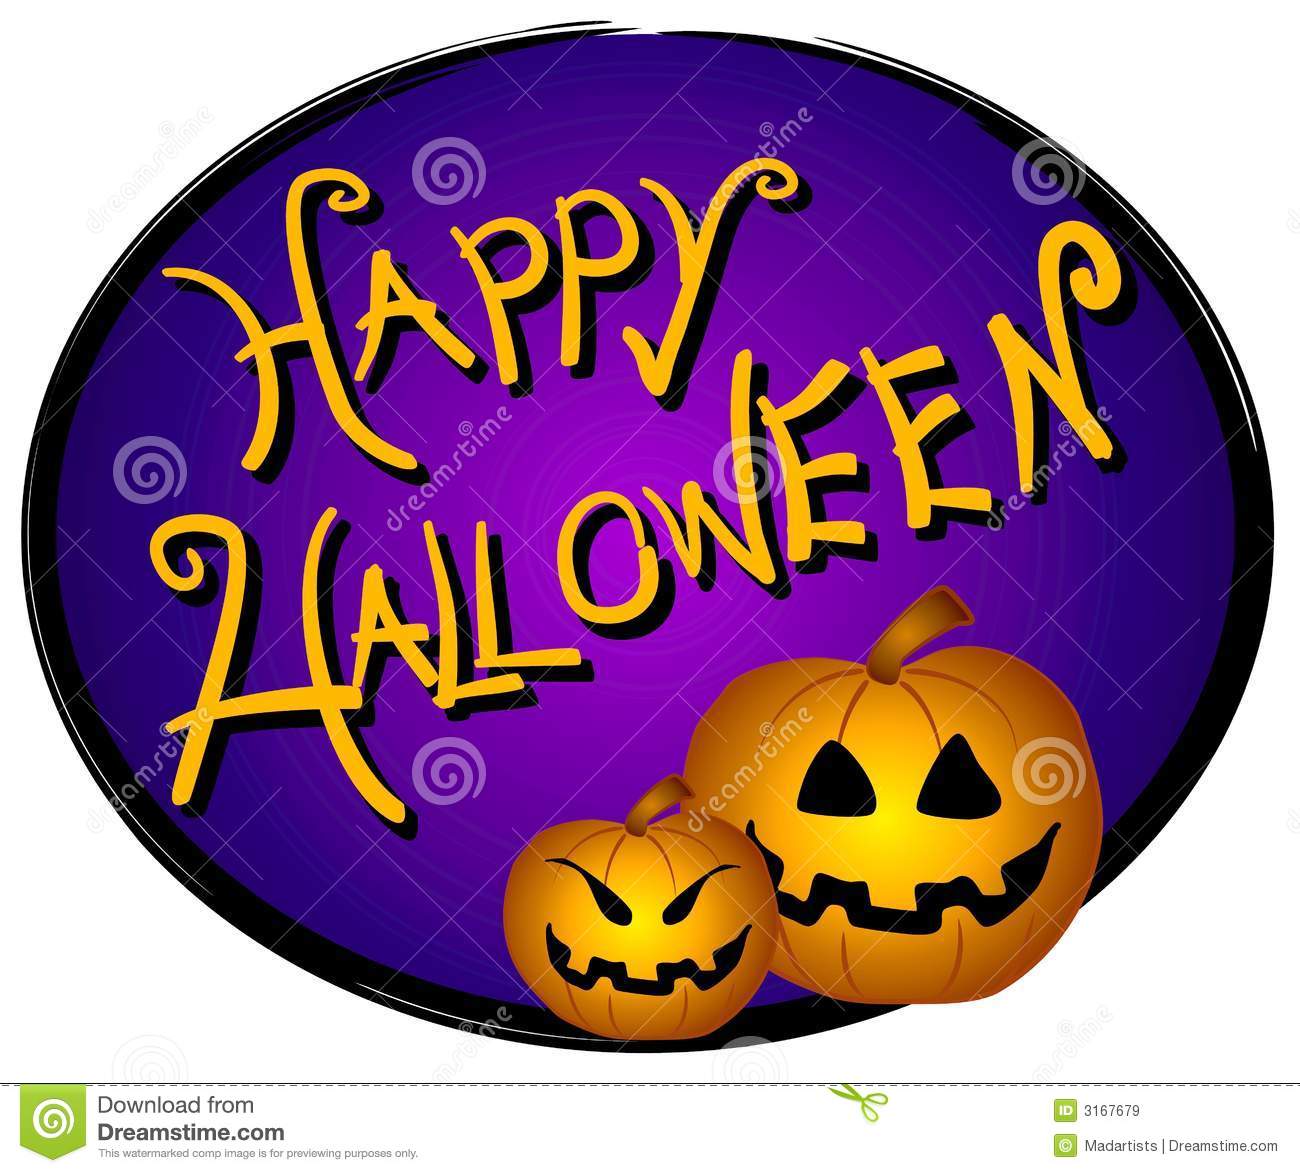 free clipart images halloween - photo #49